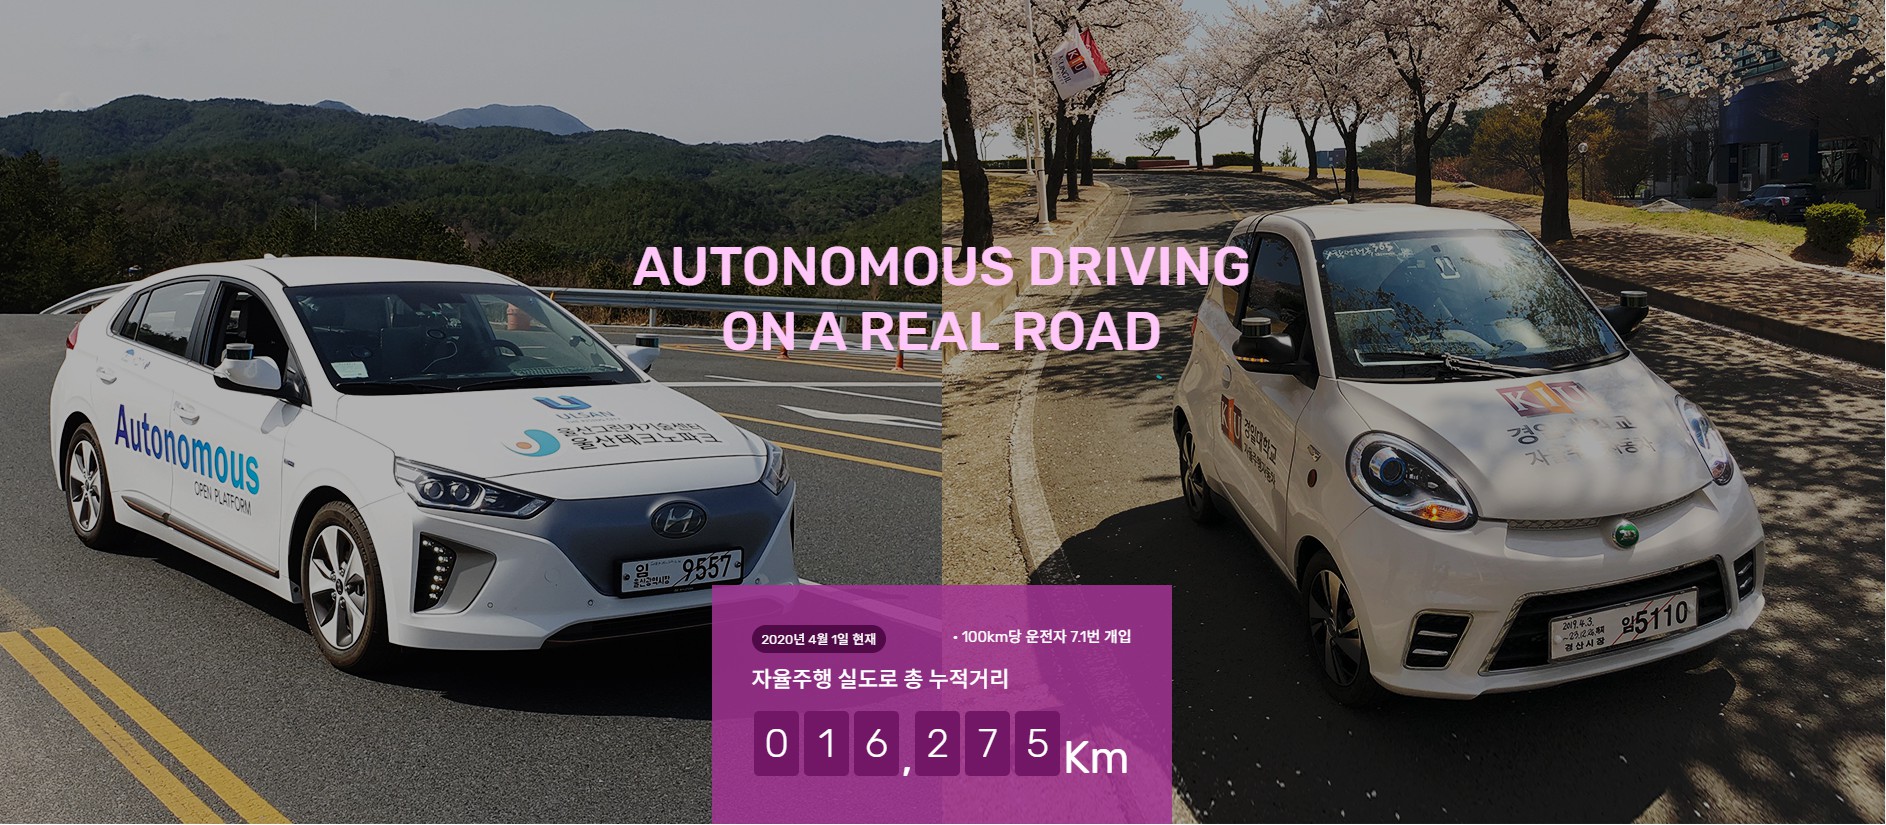 GIST signs a business agreement (MoU) for joint research on an unmanned autonomous driving platform 이미지